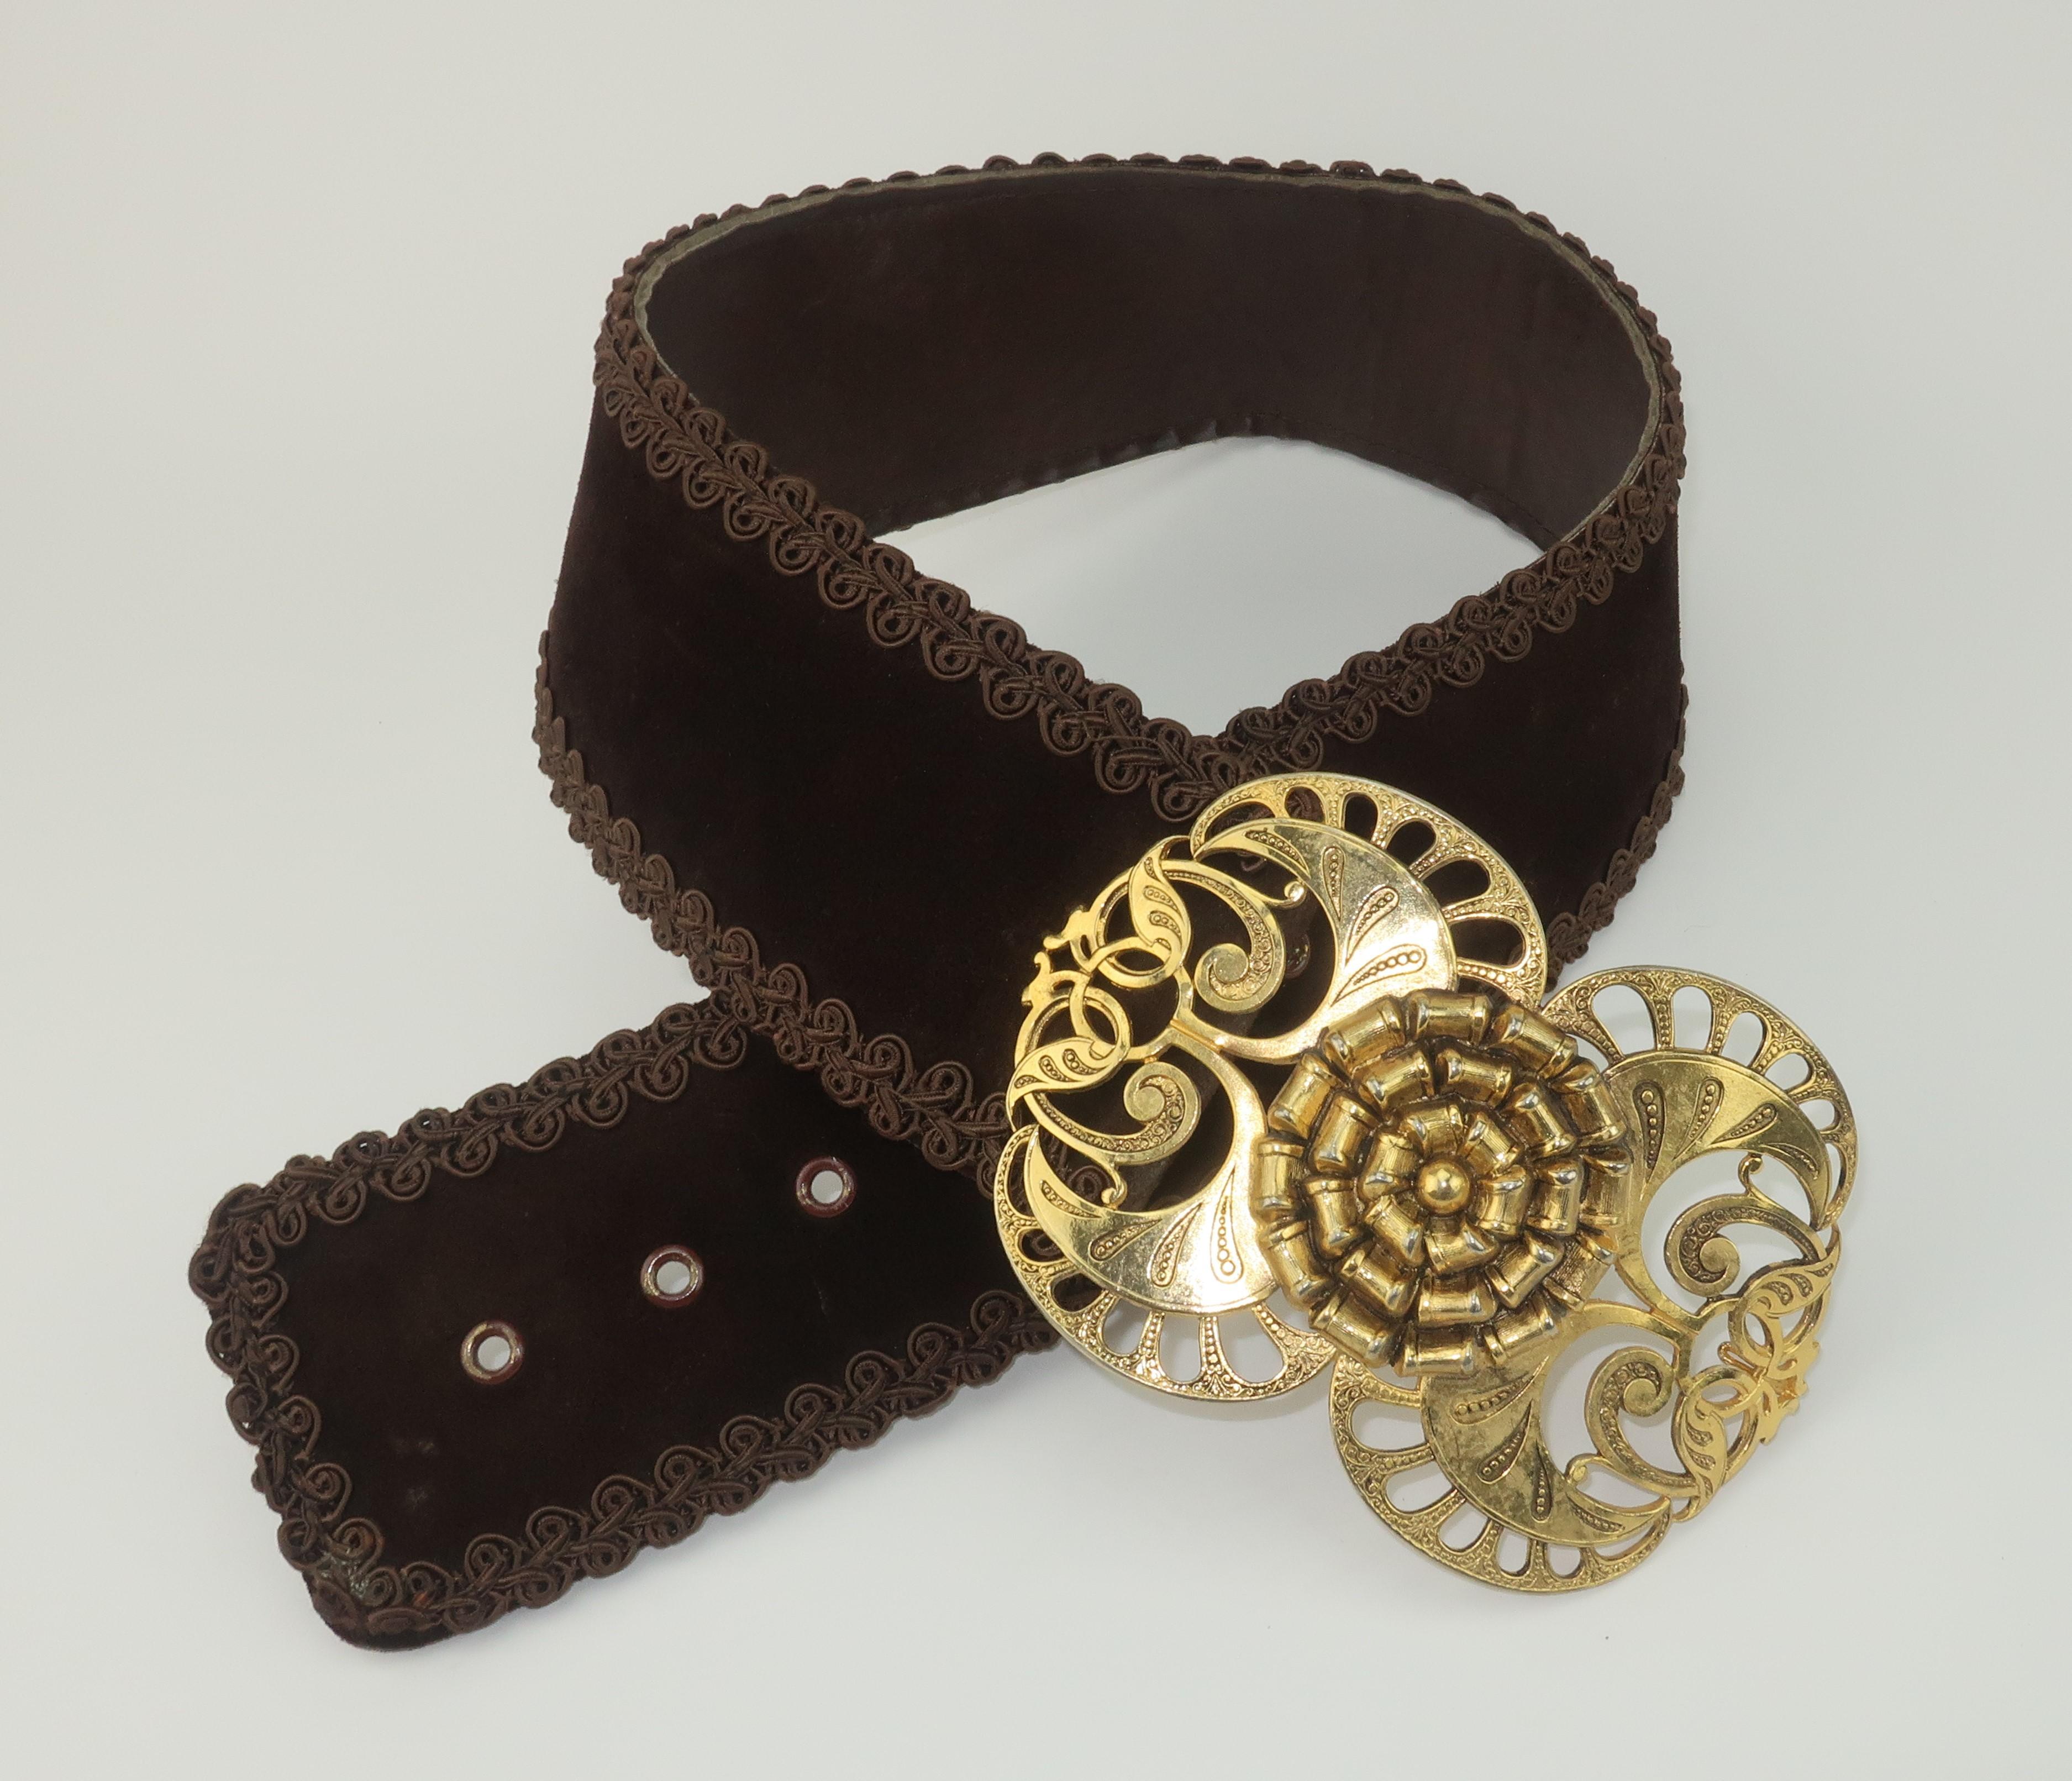 1960's mod bohemian gold tone scrolled buckle with brown suede and braid belt.  The large and statement making buckle is intricately filigreed with an abstract floral design.  The wide brown suede belt is trimmed in a passementerie braid and is